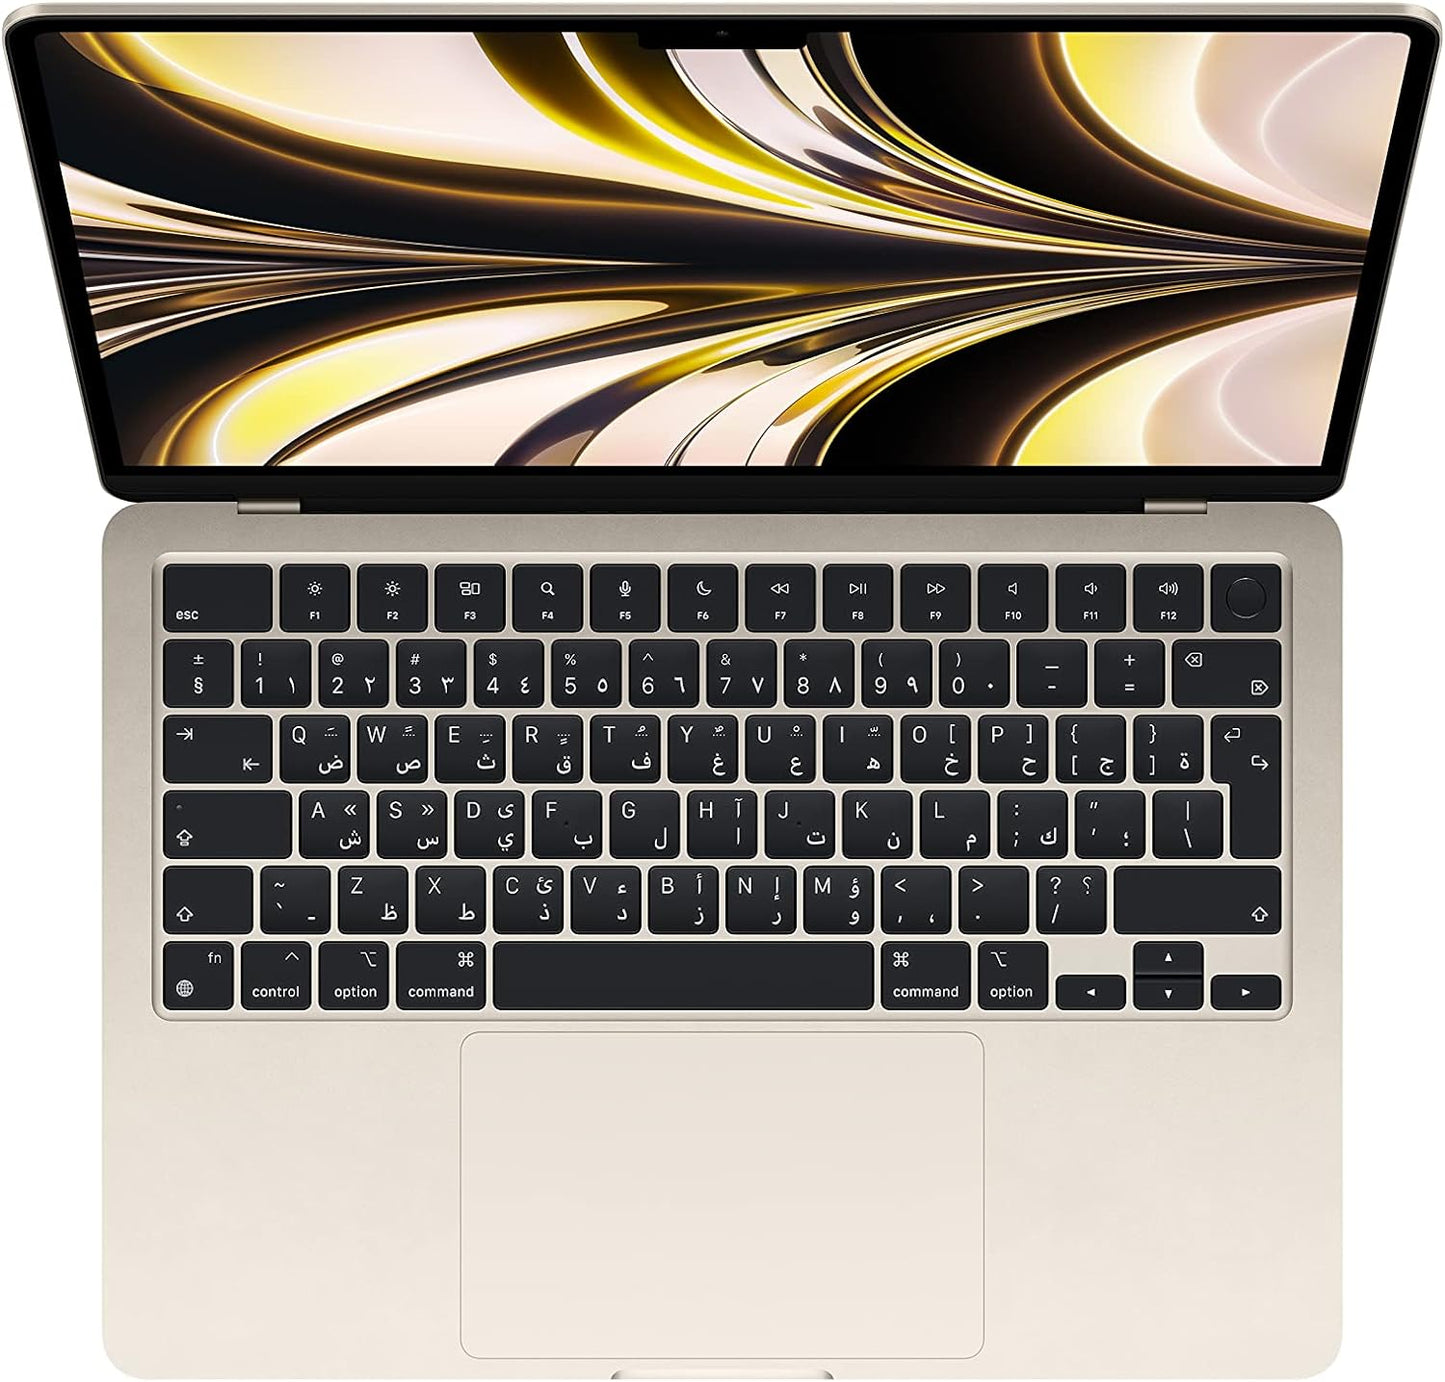 Apple 2022 MacBook Air laptop with M2 chip: 13.6-inch Liquid Retina display, 8GB RAM, 256GB SSD storage, 1080p FaceTime HD camera. Works with iPhone and iPad; Midnight; English